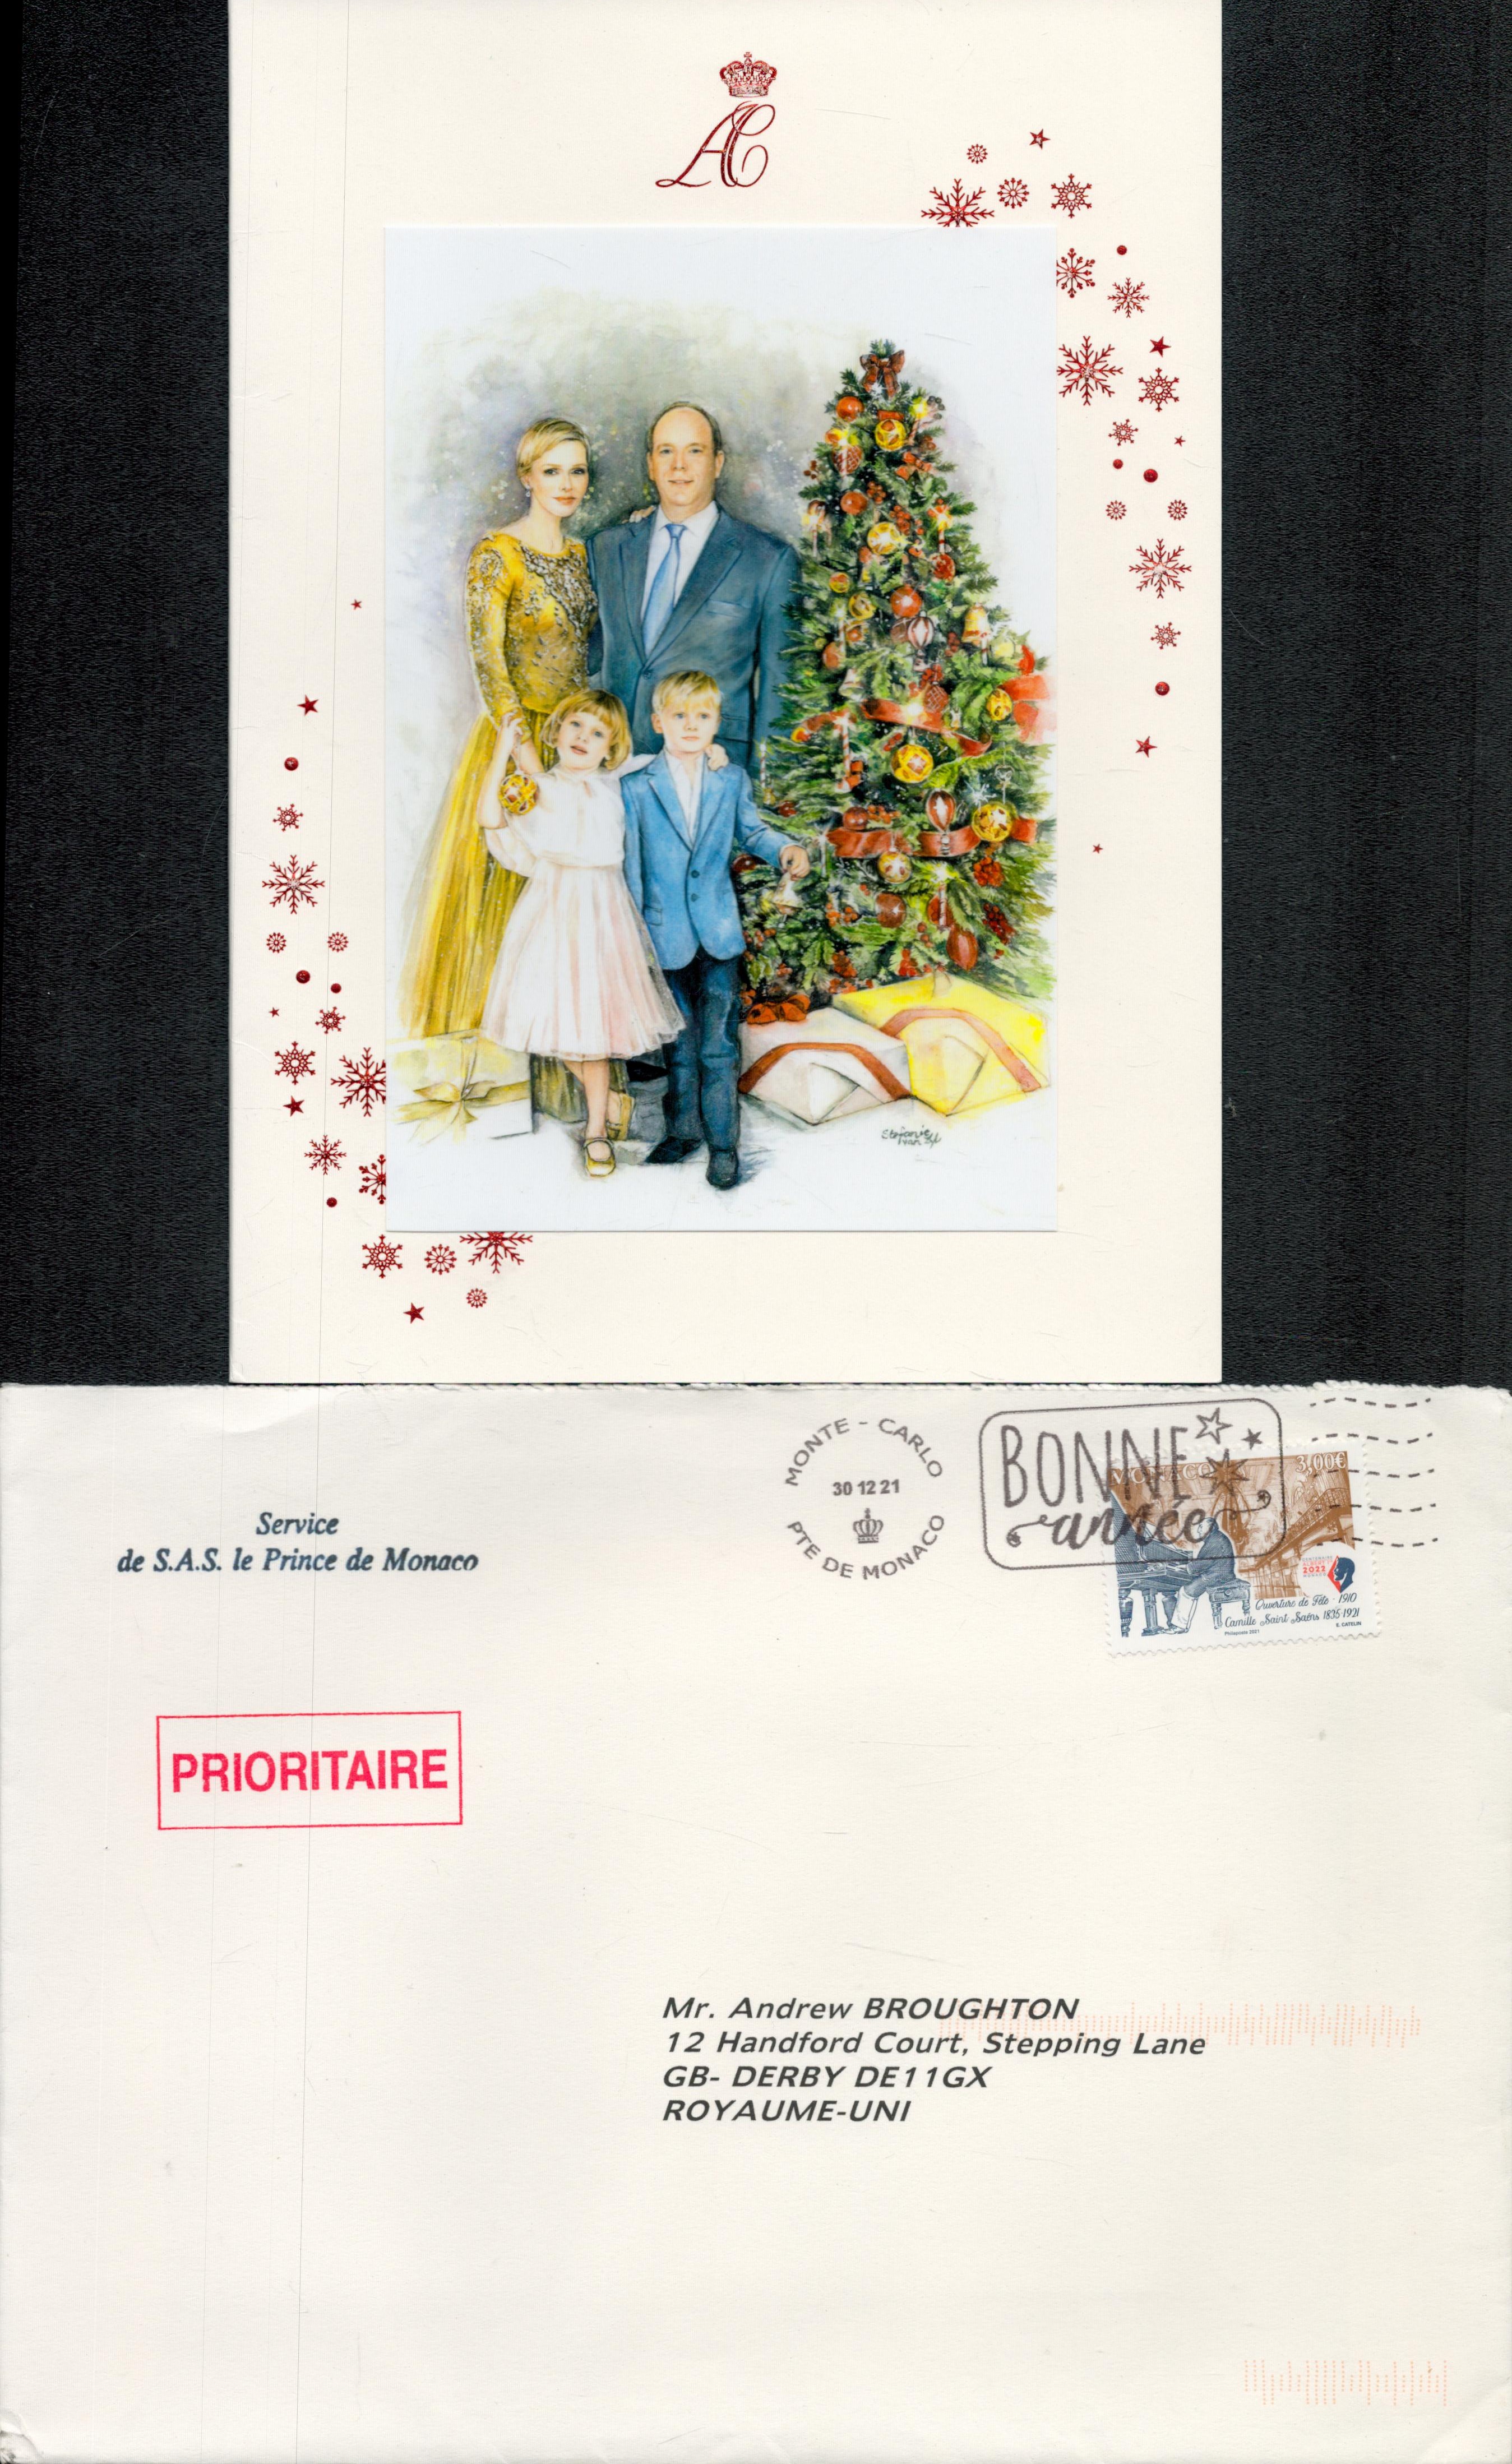 His Serene Highness prince albert II of Monaco The formal 2021 Christmas card from the Ruler of - Image 2 of 2